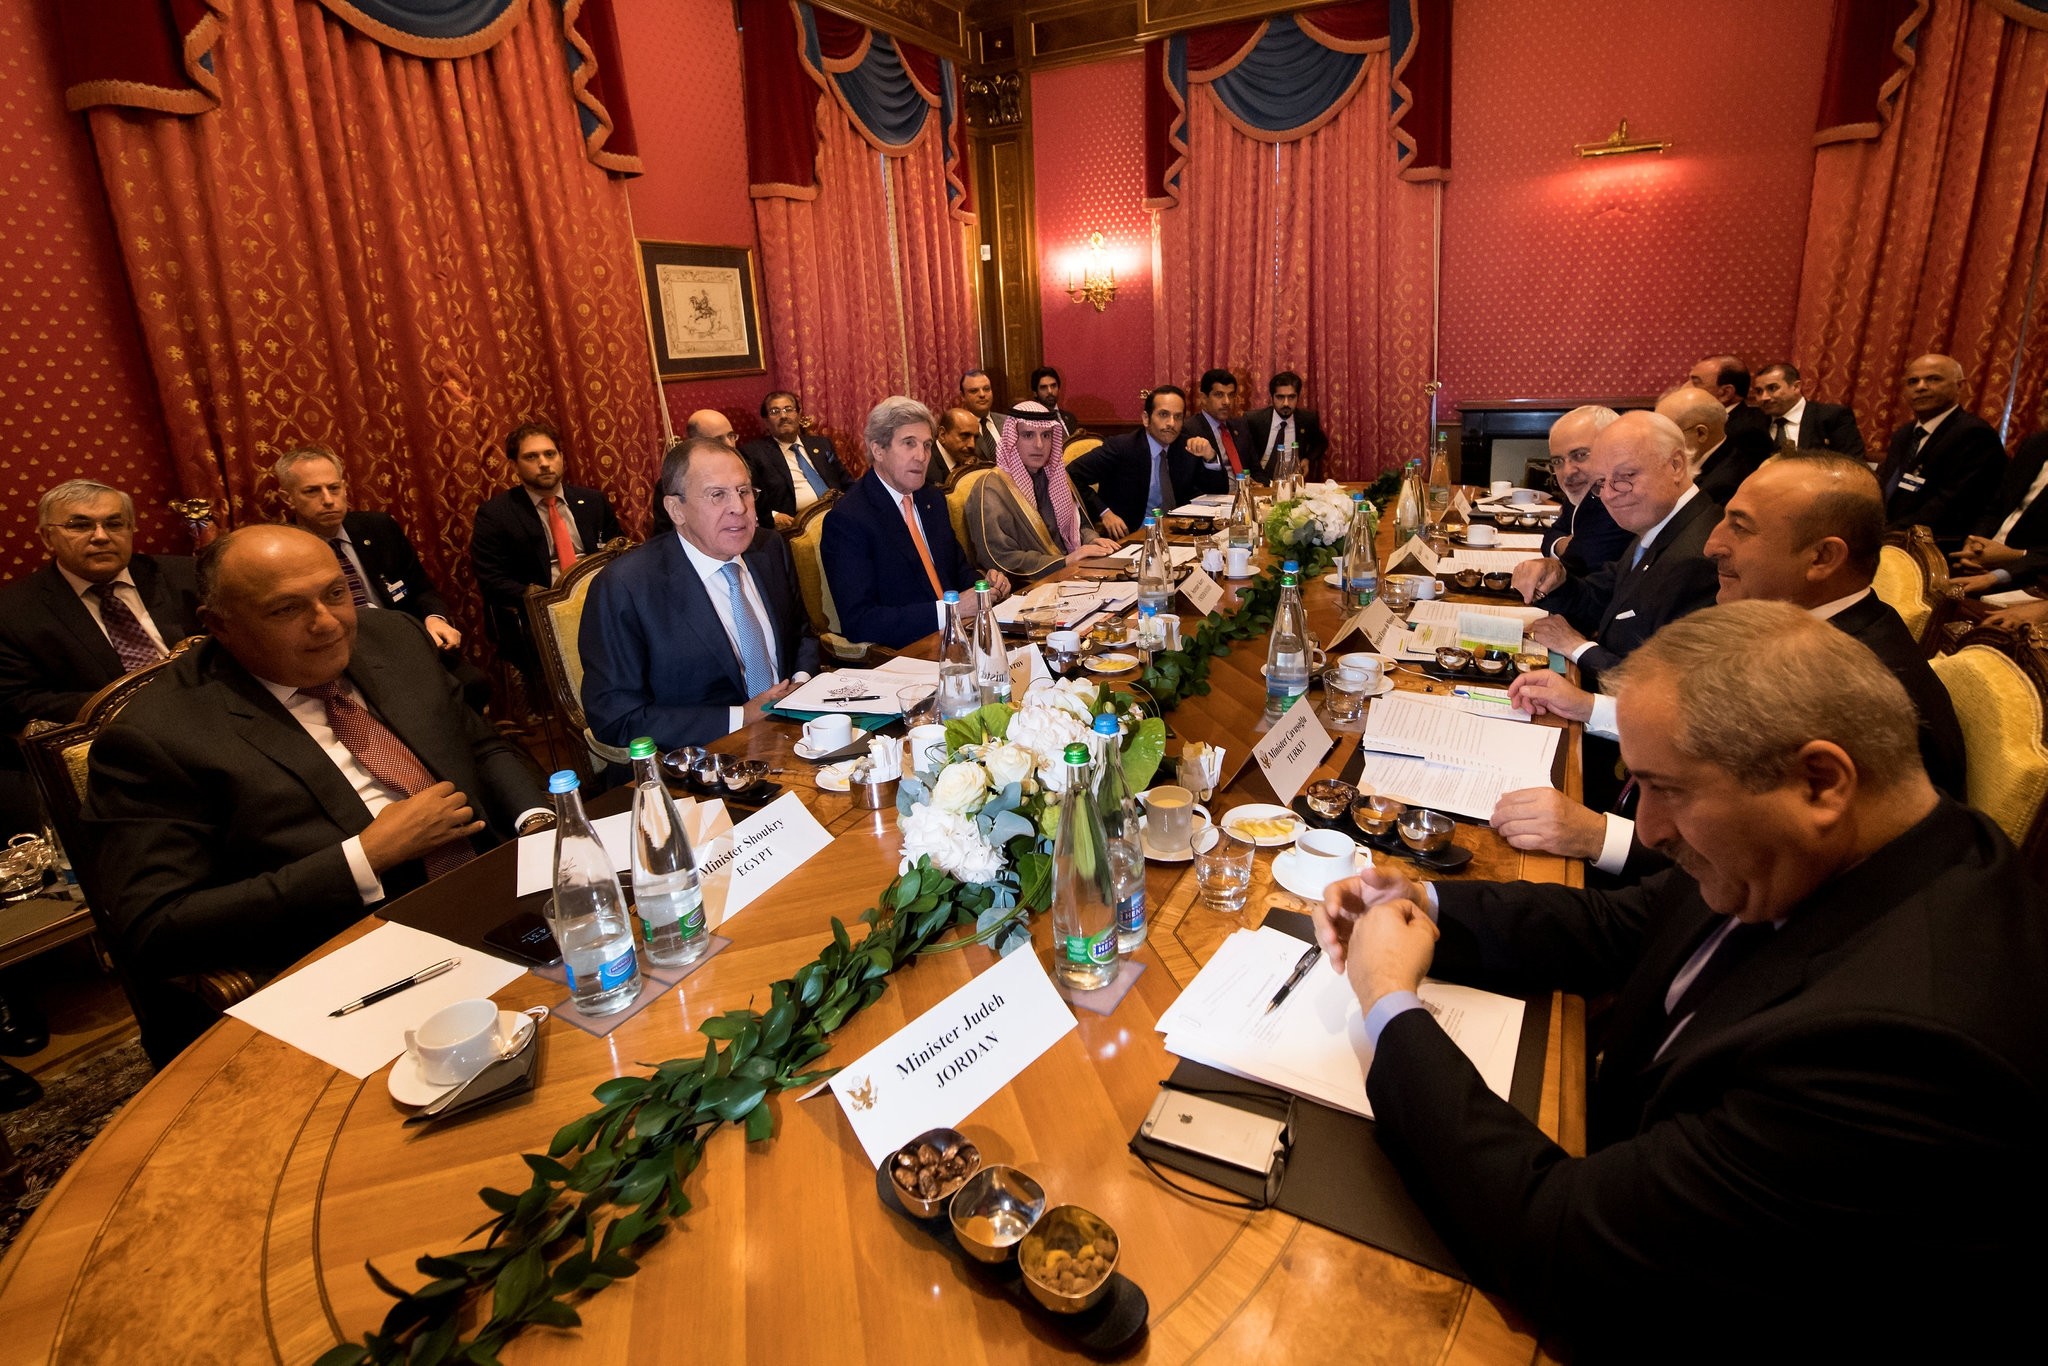 Foreign ministers of nine countries speak together around a table during a bilateral meeting where they discussed the crisis in Syria, in Lausanne, Switzerland. (REUTERS Photo)